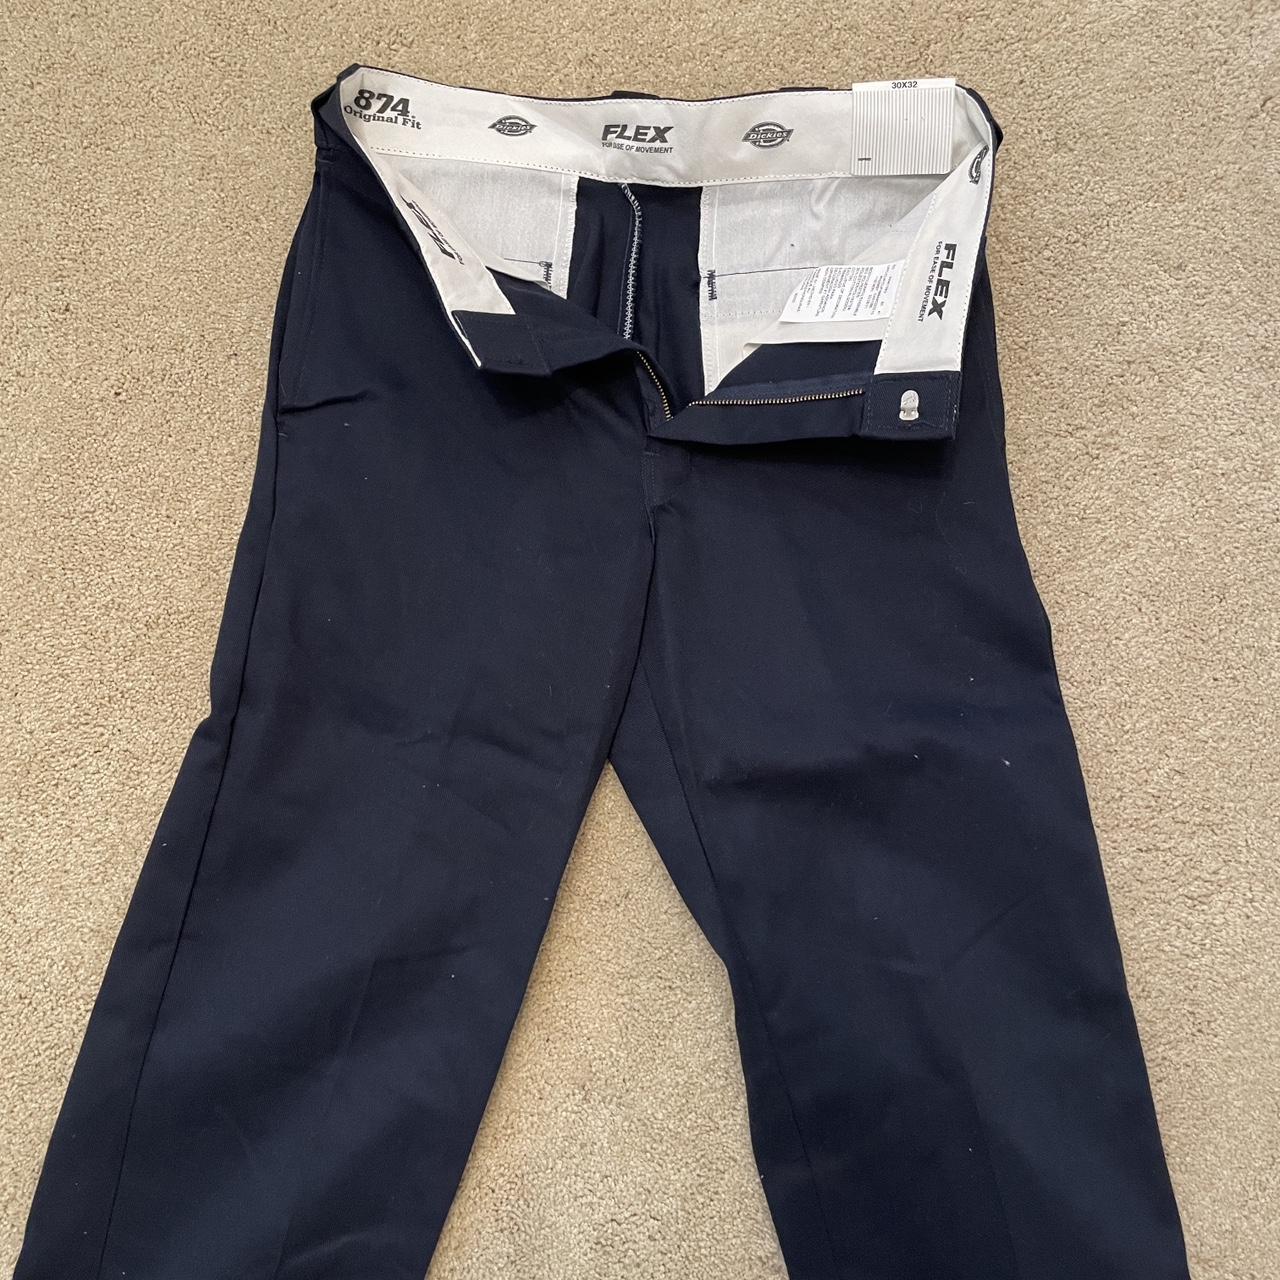 dickies 574 flex pants NEW WITH TAGS! Fits 25-26 - Depop